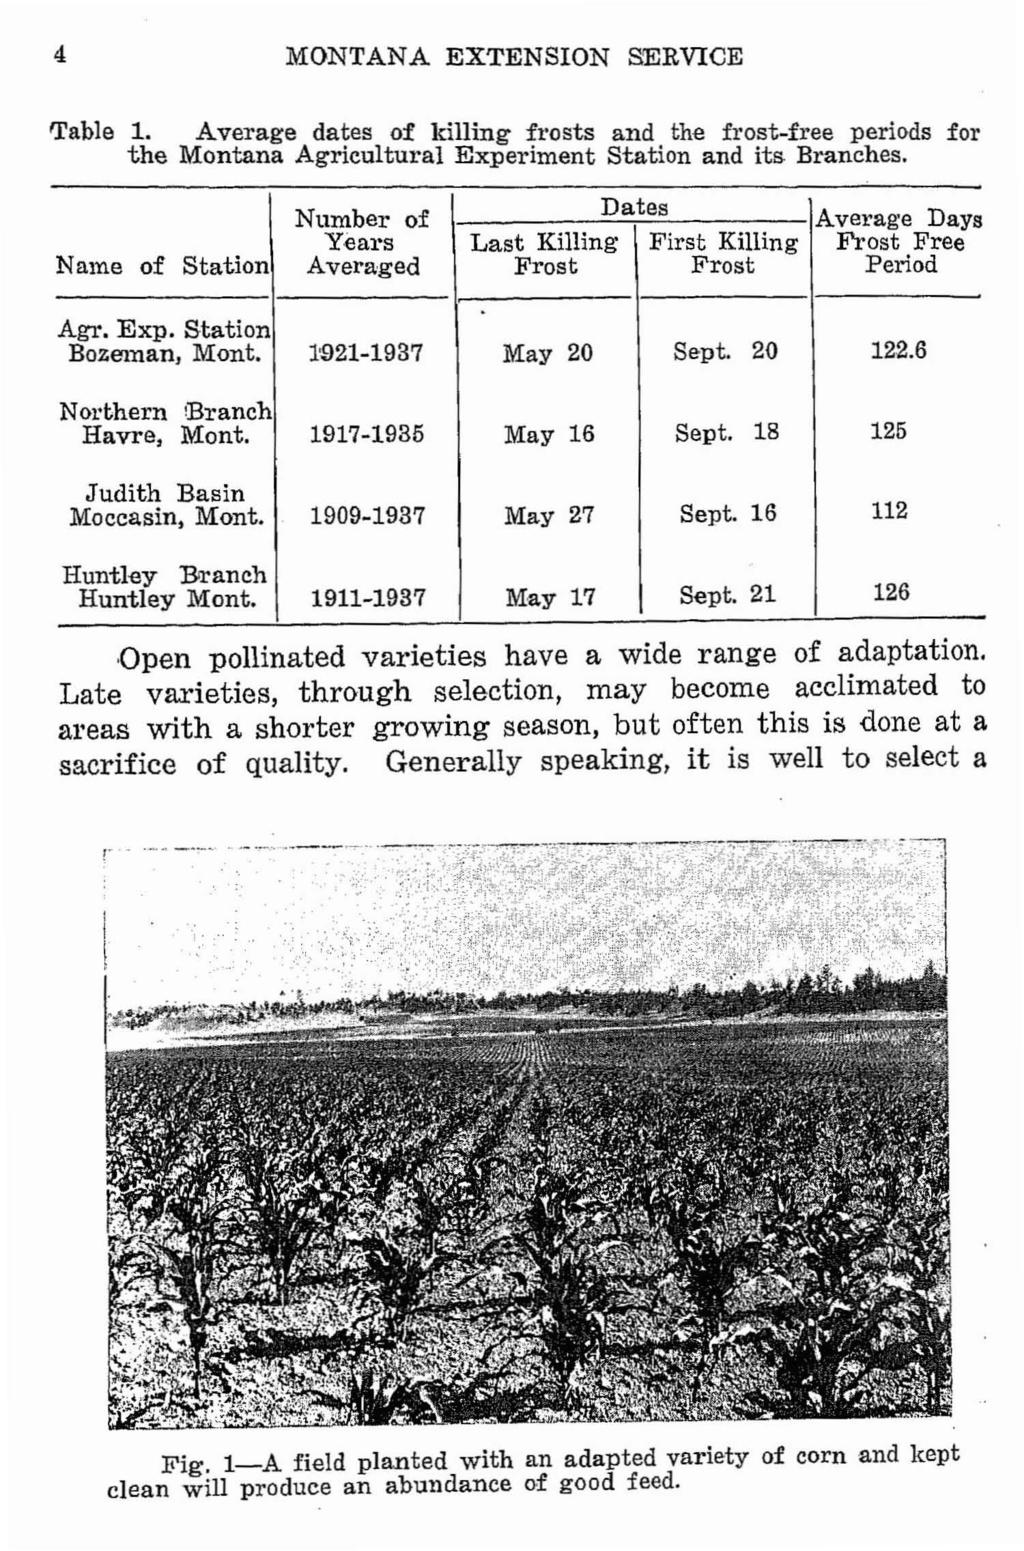 4 MONTANA EXTENSION SERVICE Table 1. Average dates of killing frosts and the frost-free periods for the Montana Agricultural Experiment Station and its Branches.